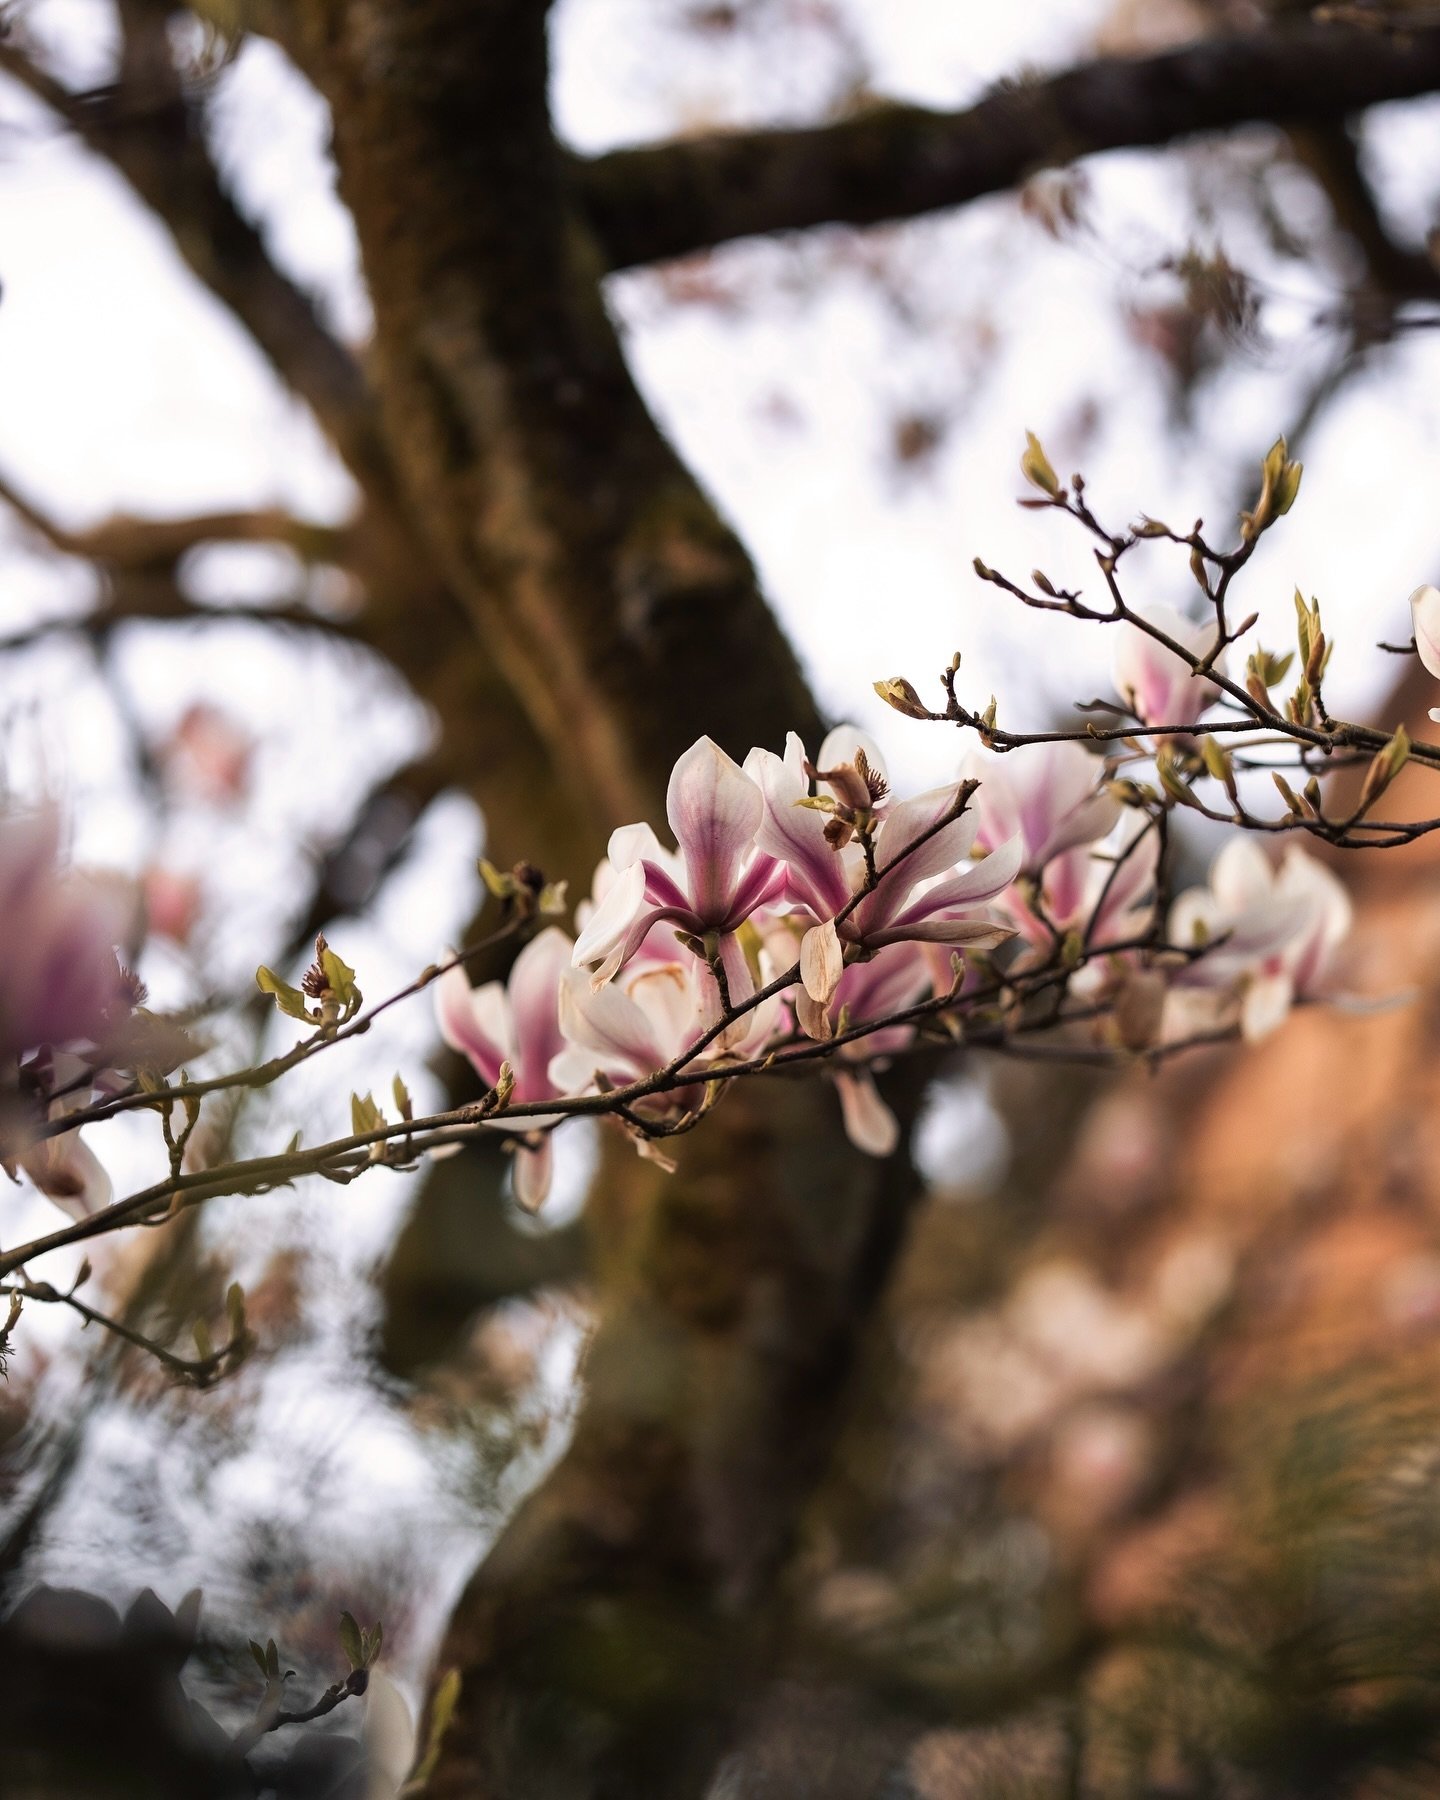 The last of the magnolia, snapped during a sunset walk in Henley-on-Thames 🌸
〰️
I don&rsquo;t know about you guys, but I find the gradual change in seasons so inspiring 🌦️ what&rsquo;s your favourite time of year?
.
.
.
.
#magnolia #springwatch #sp